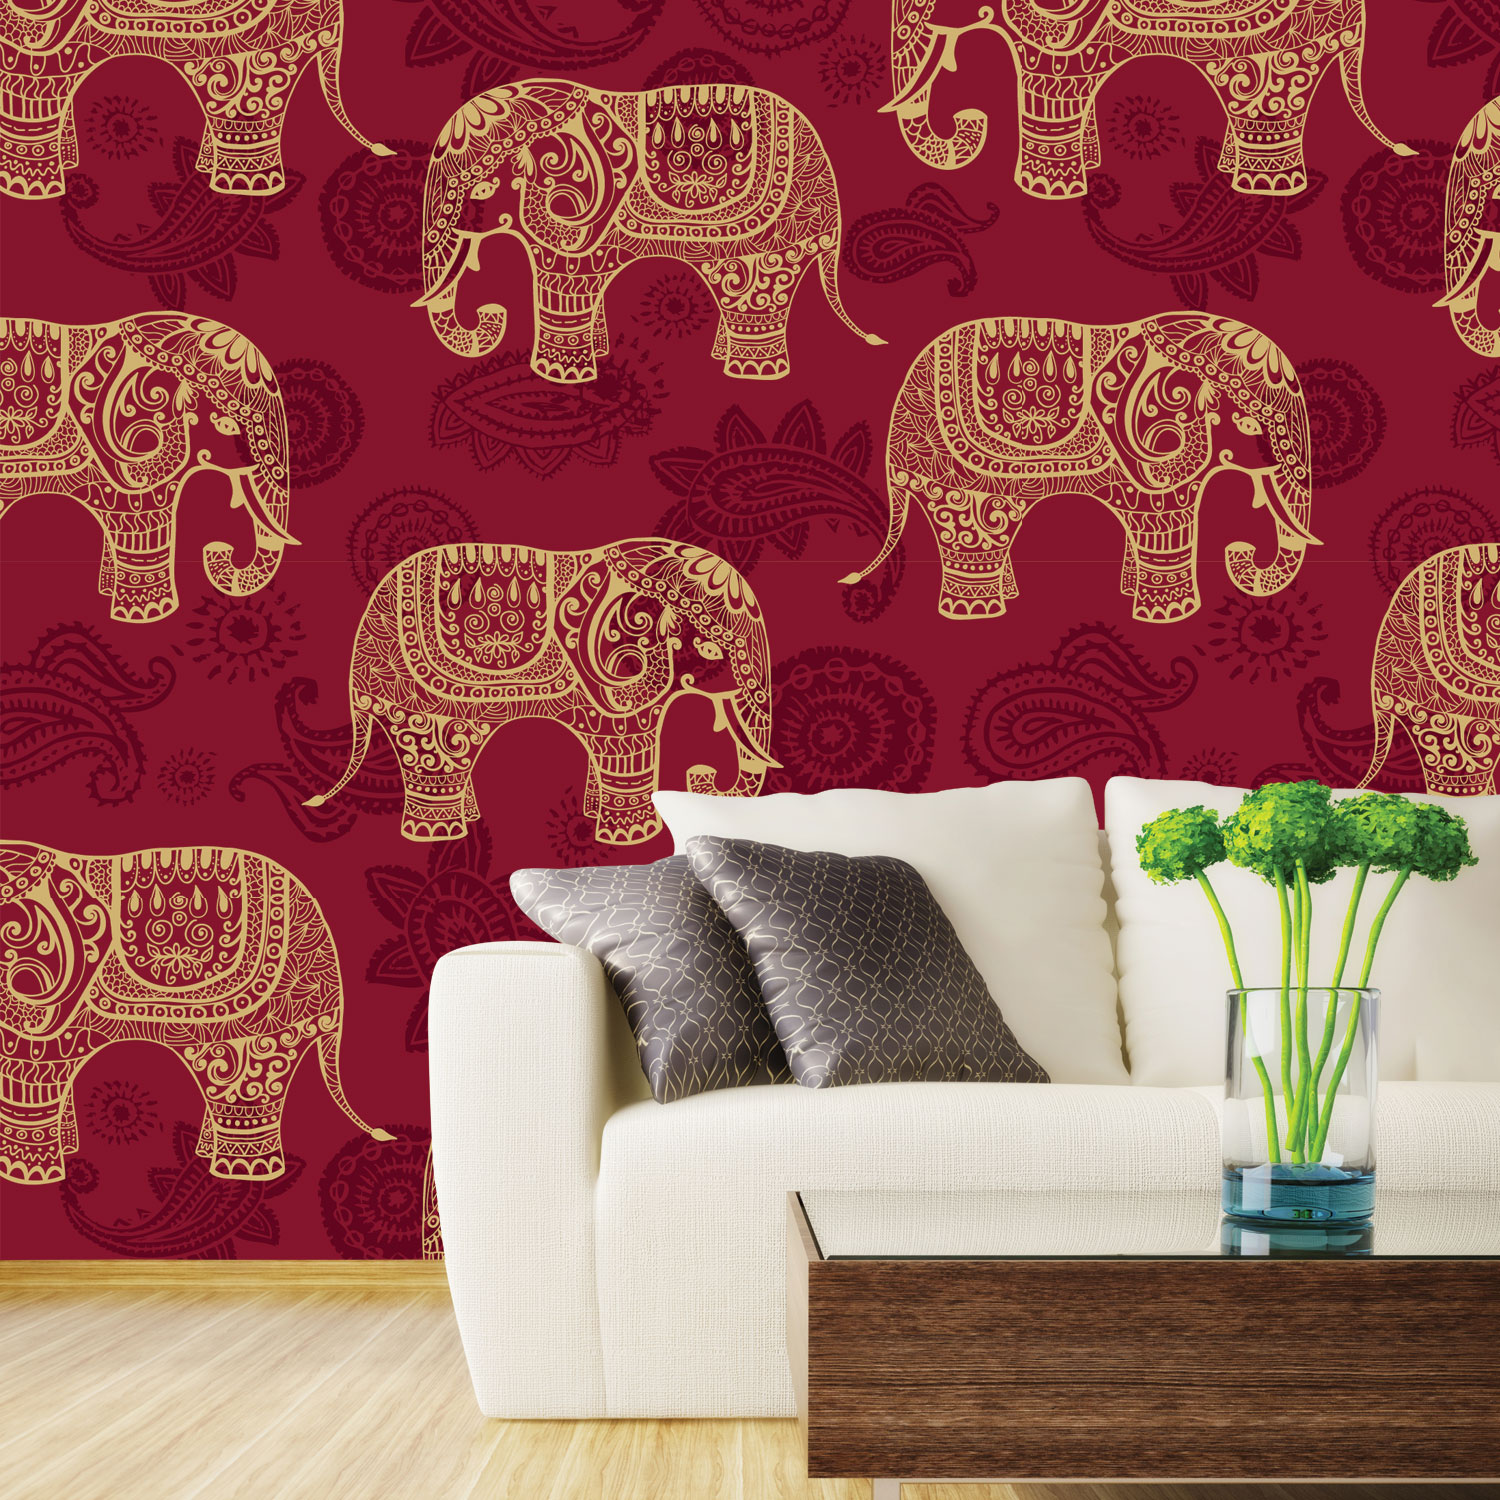 wallpaper design for wall in india,elephant,indian elephant,wall sticker,wallpaper,elephants and mammoths